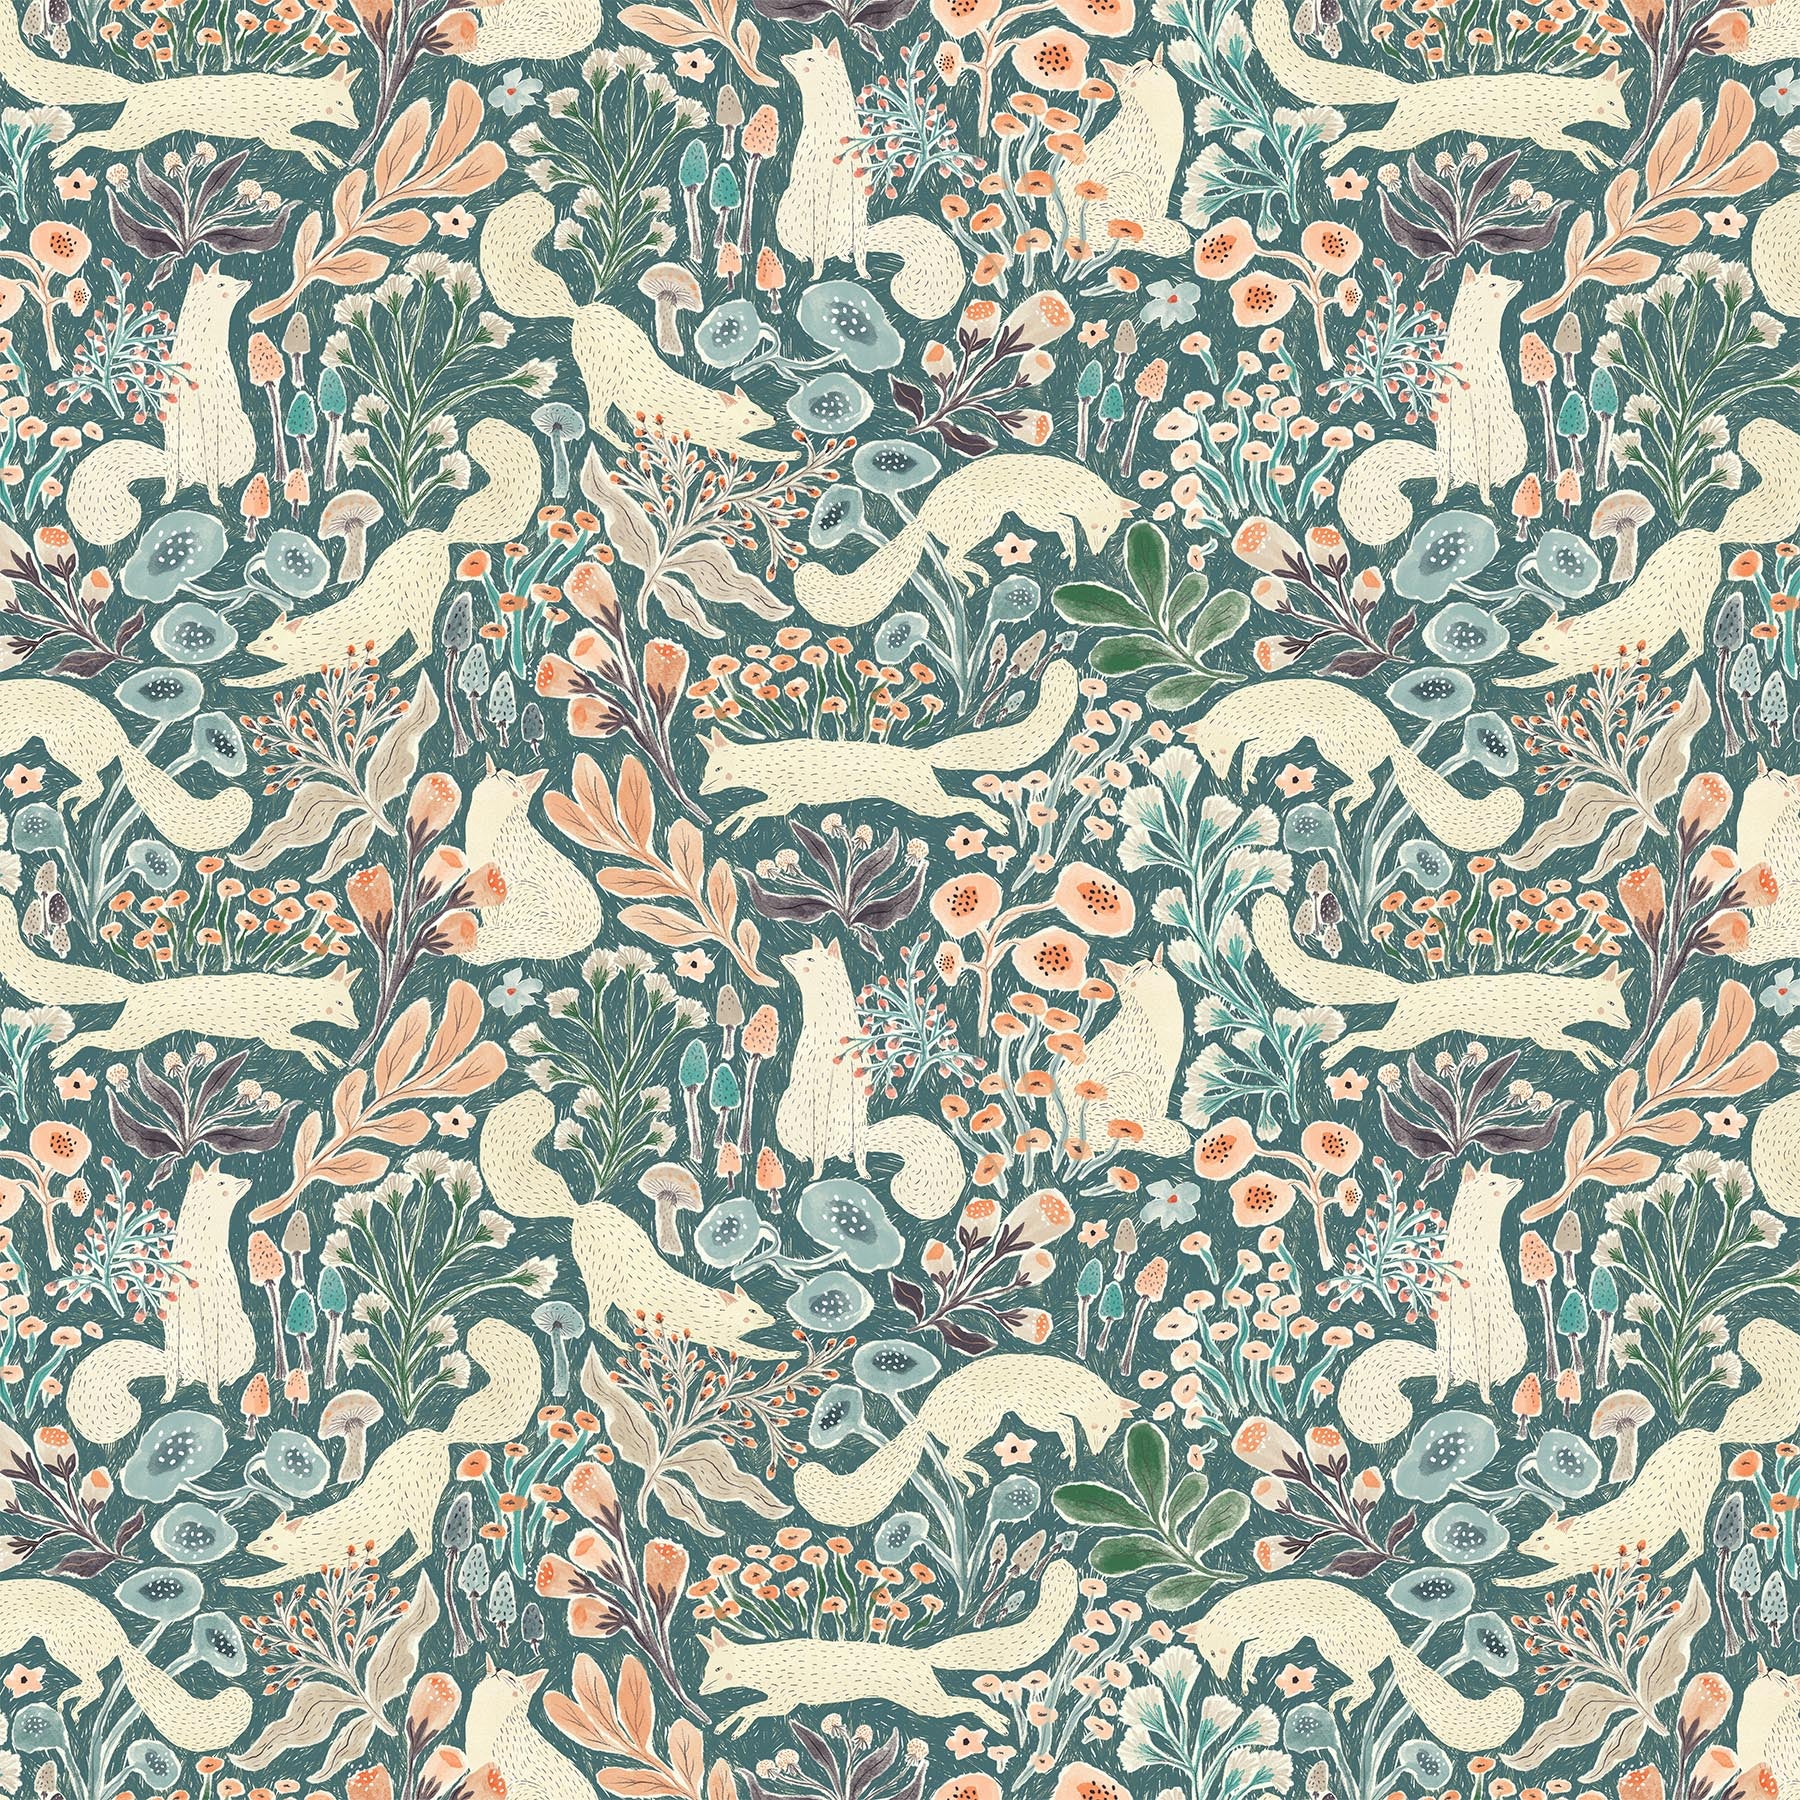 Thicket and Bramble - Fox, Teal